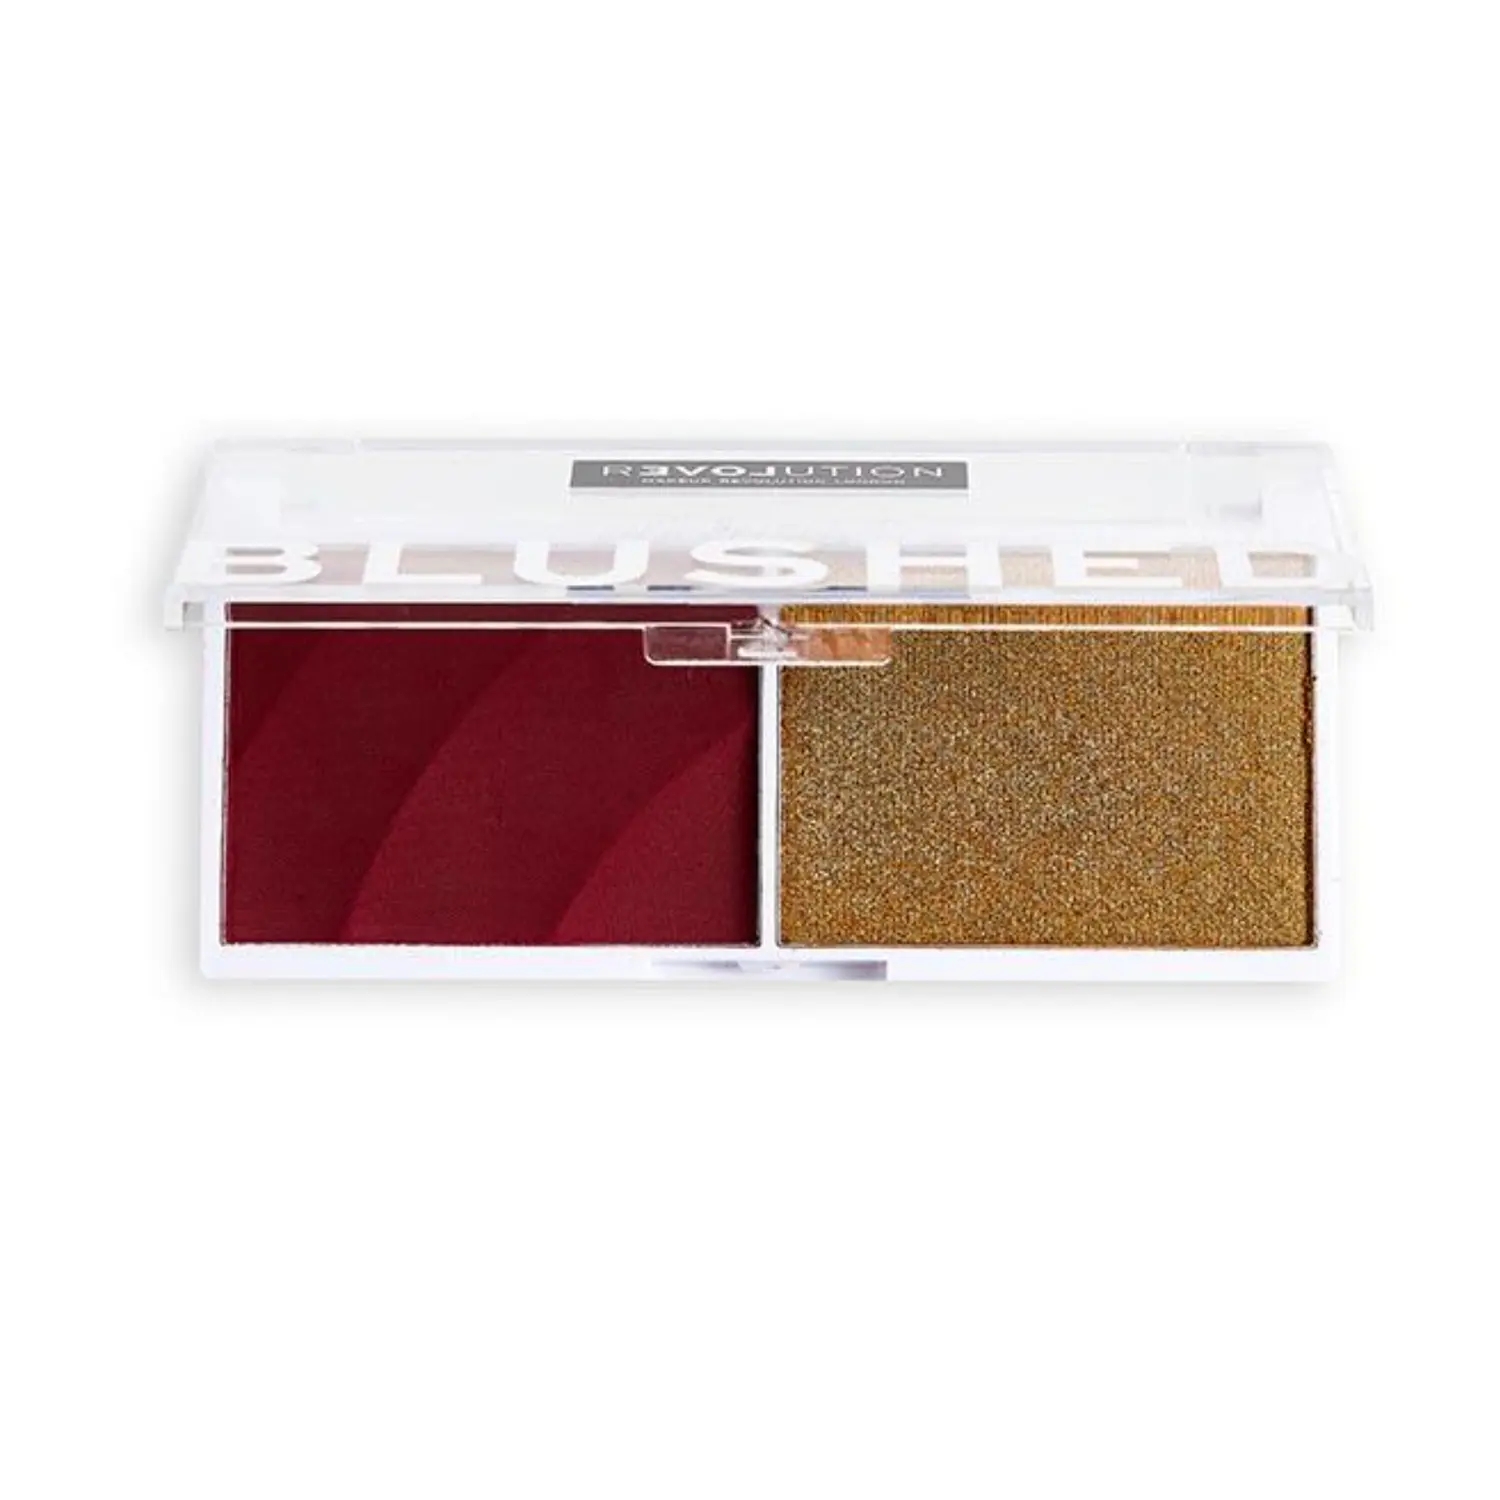 Makeup Revolution | Makeup Revolution Remove Colour Play Blushed Duo Face Palette - Wishful (5.8g)